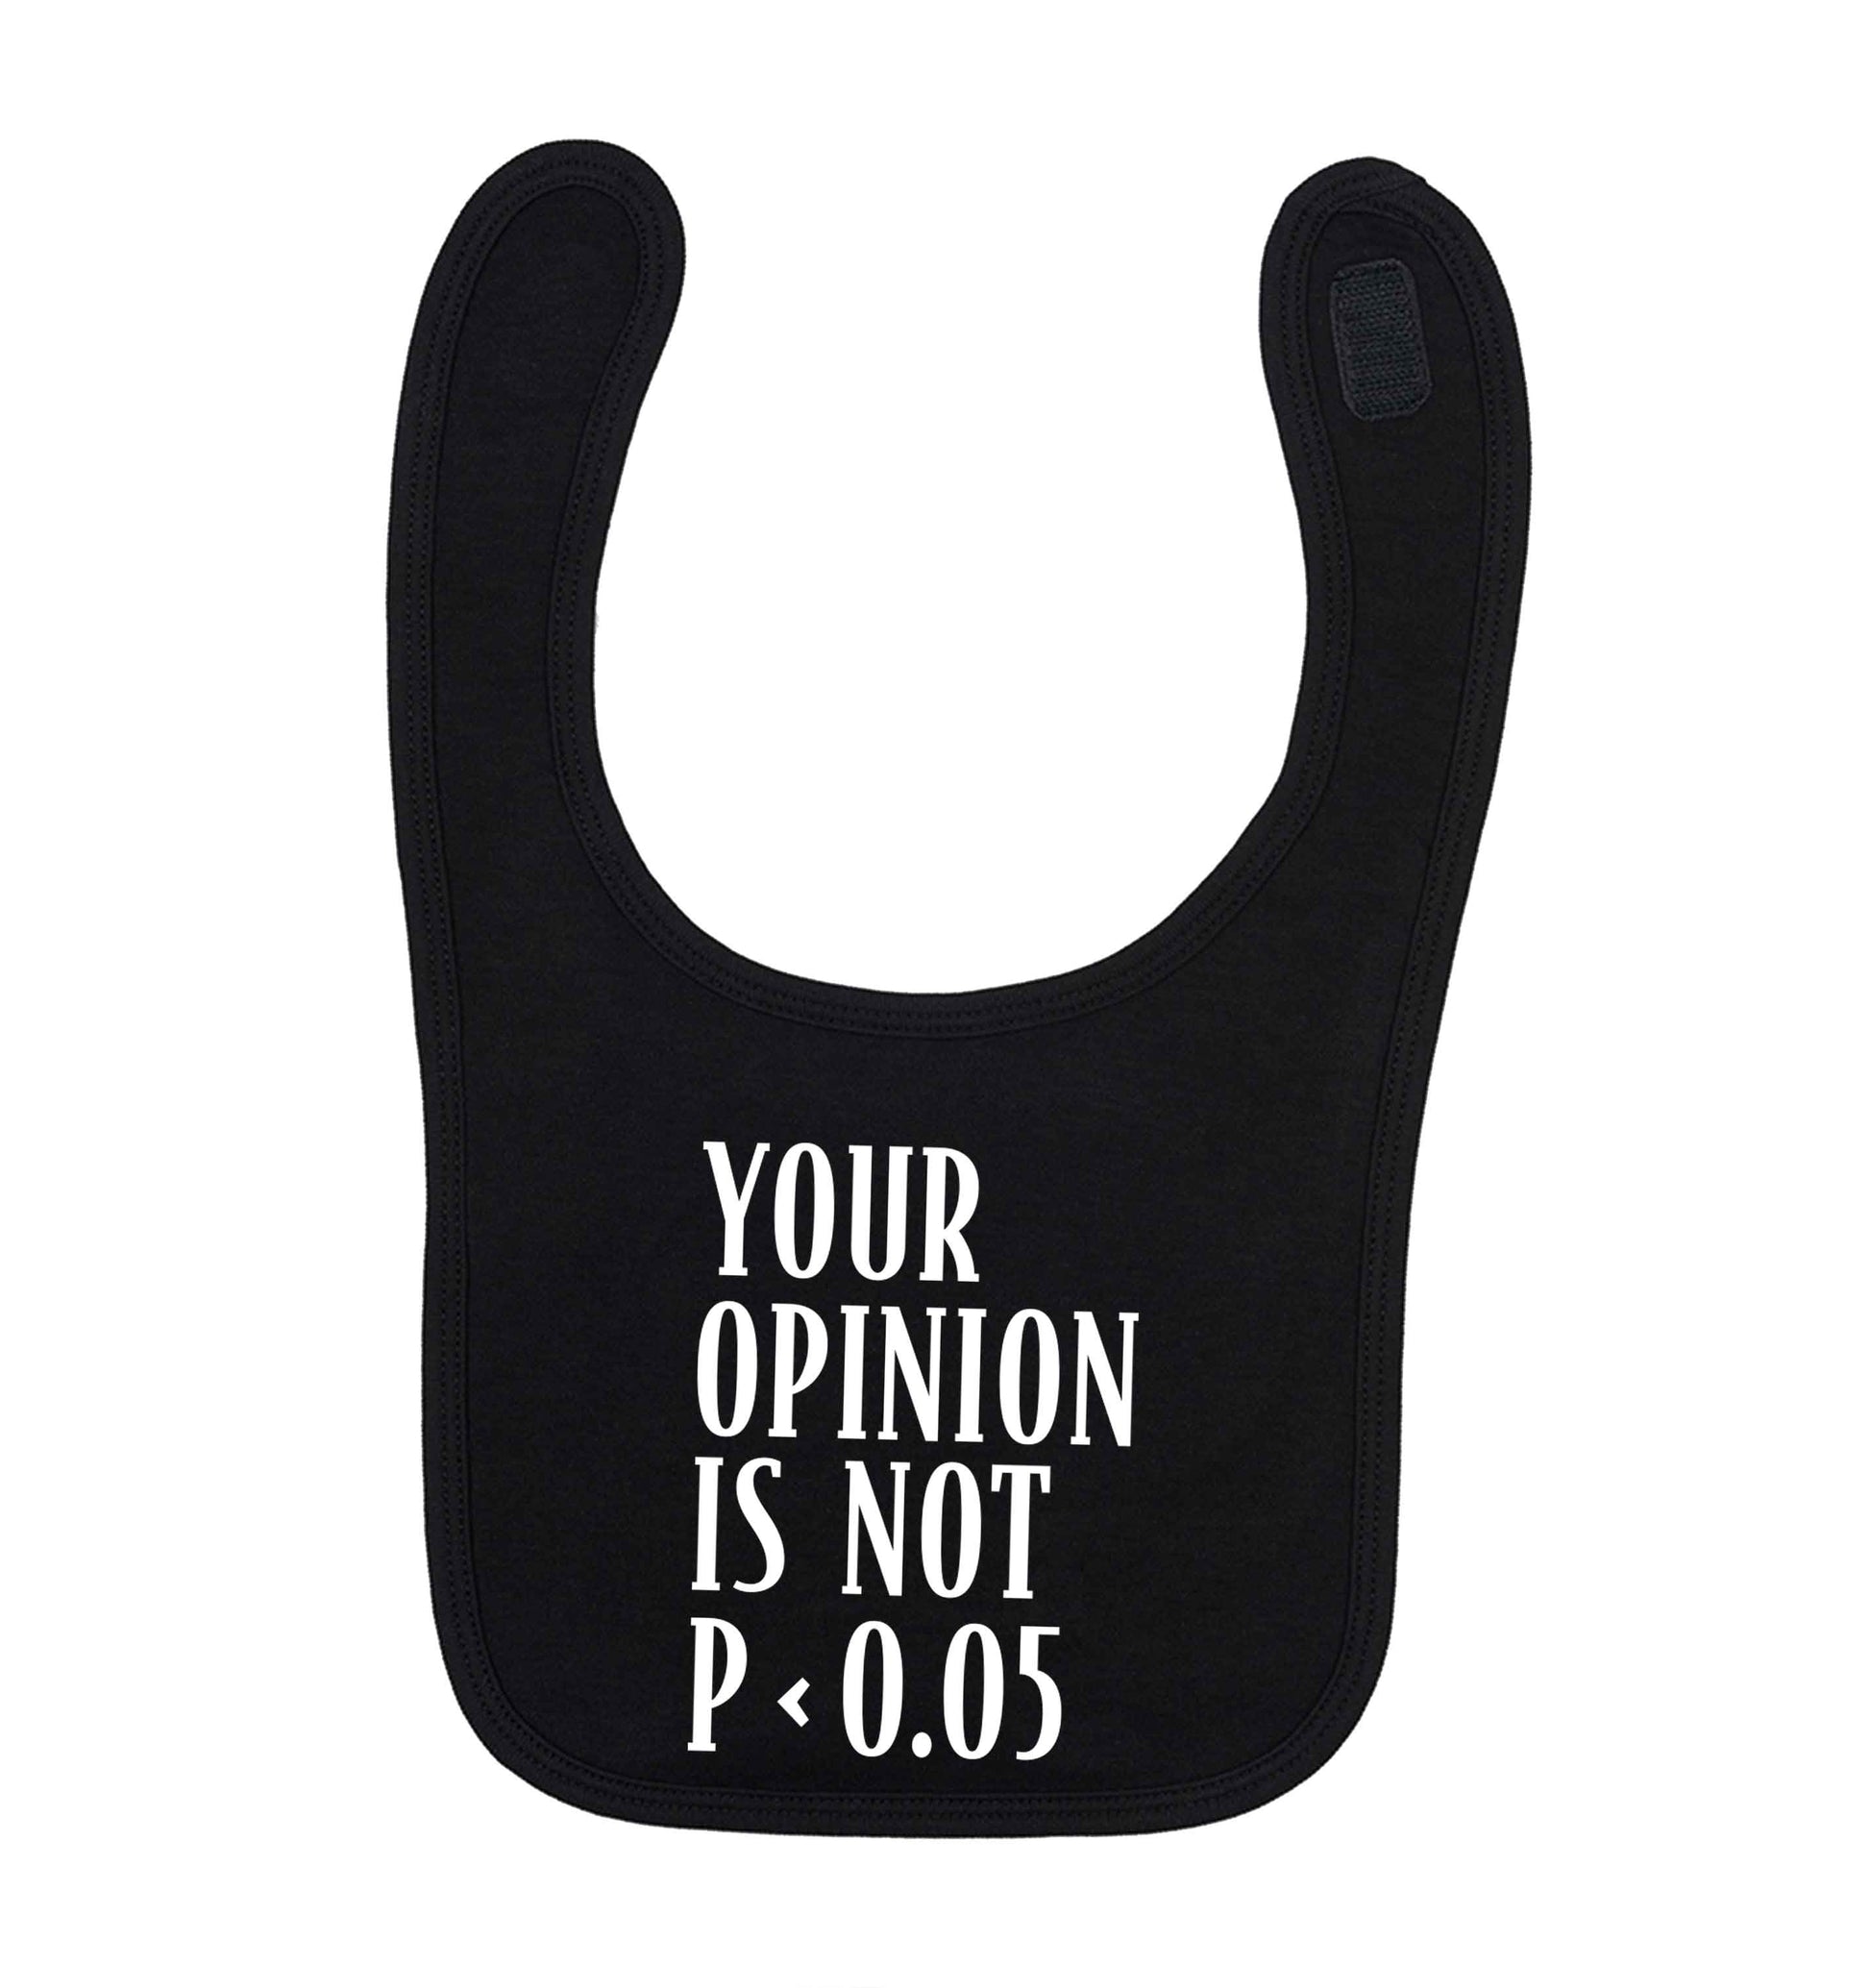 Your opinion is not P < 0.05black baby bib